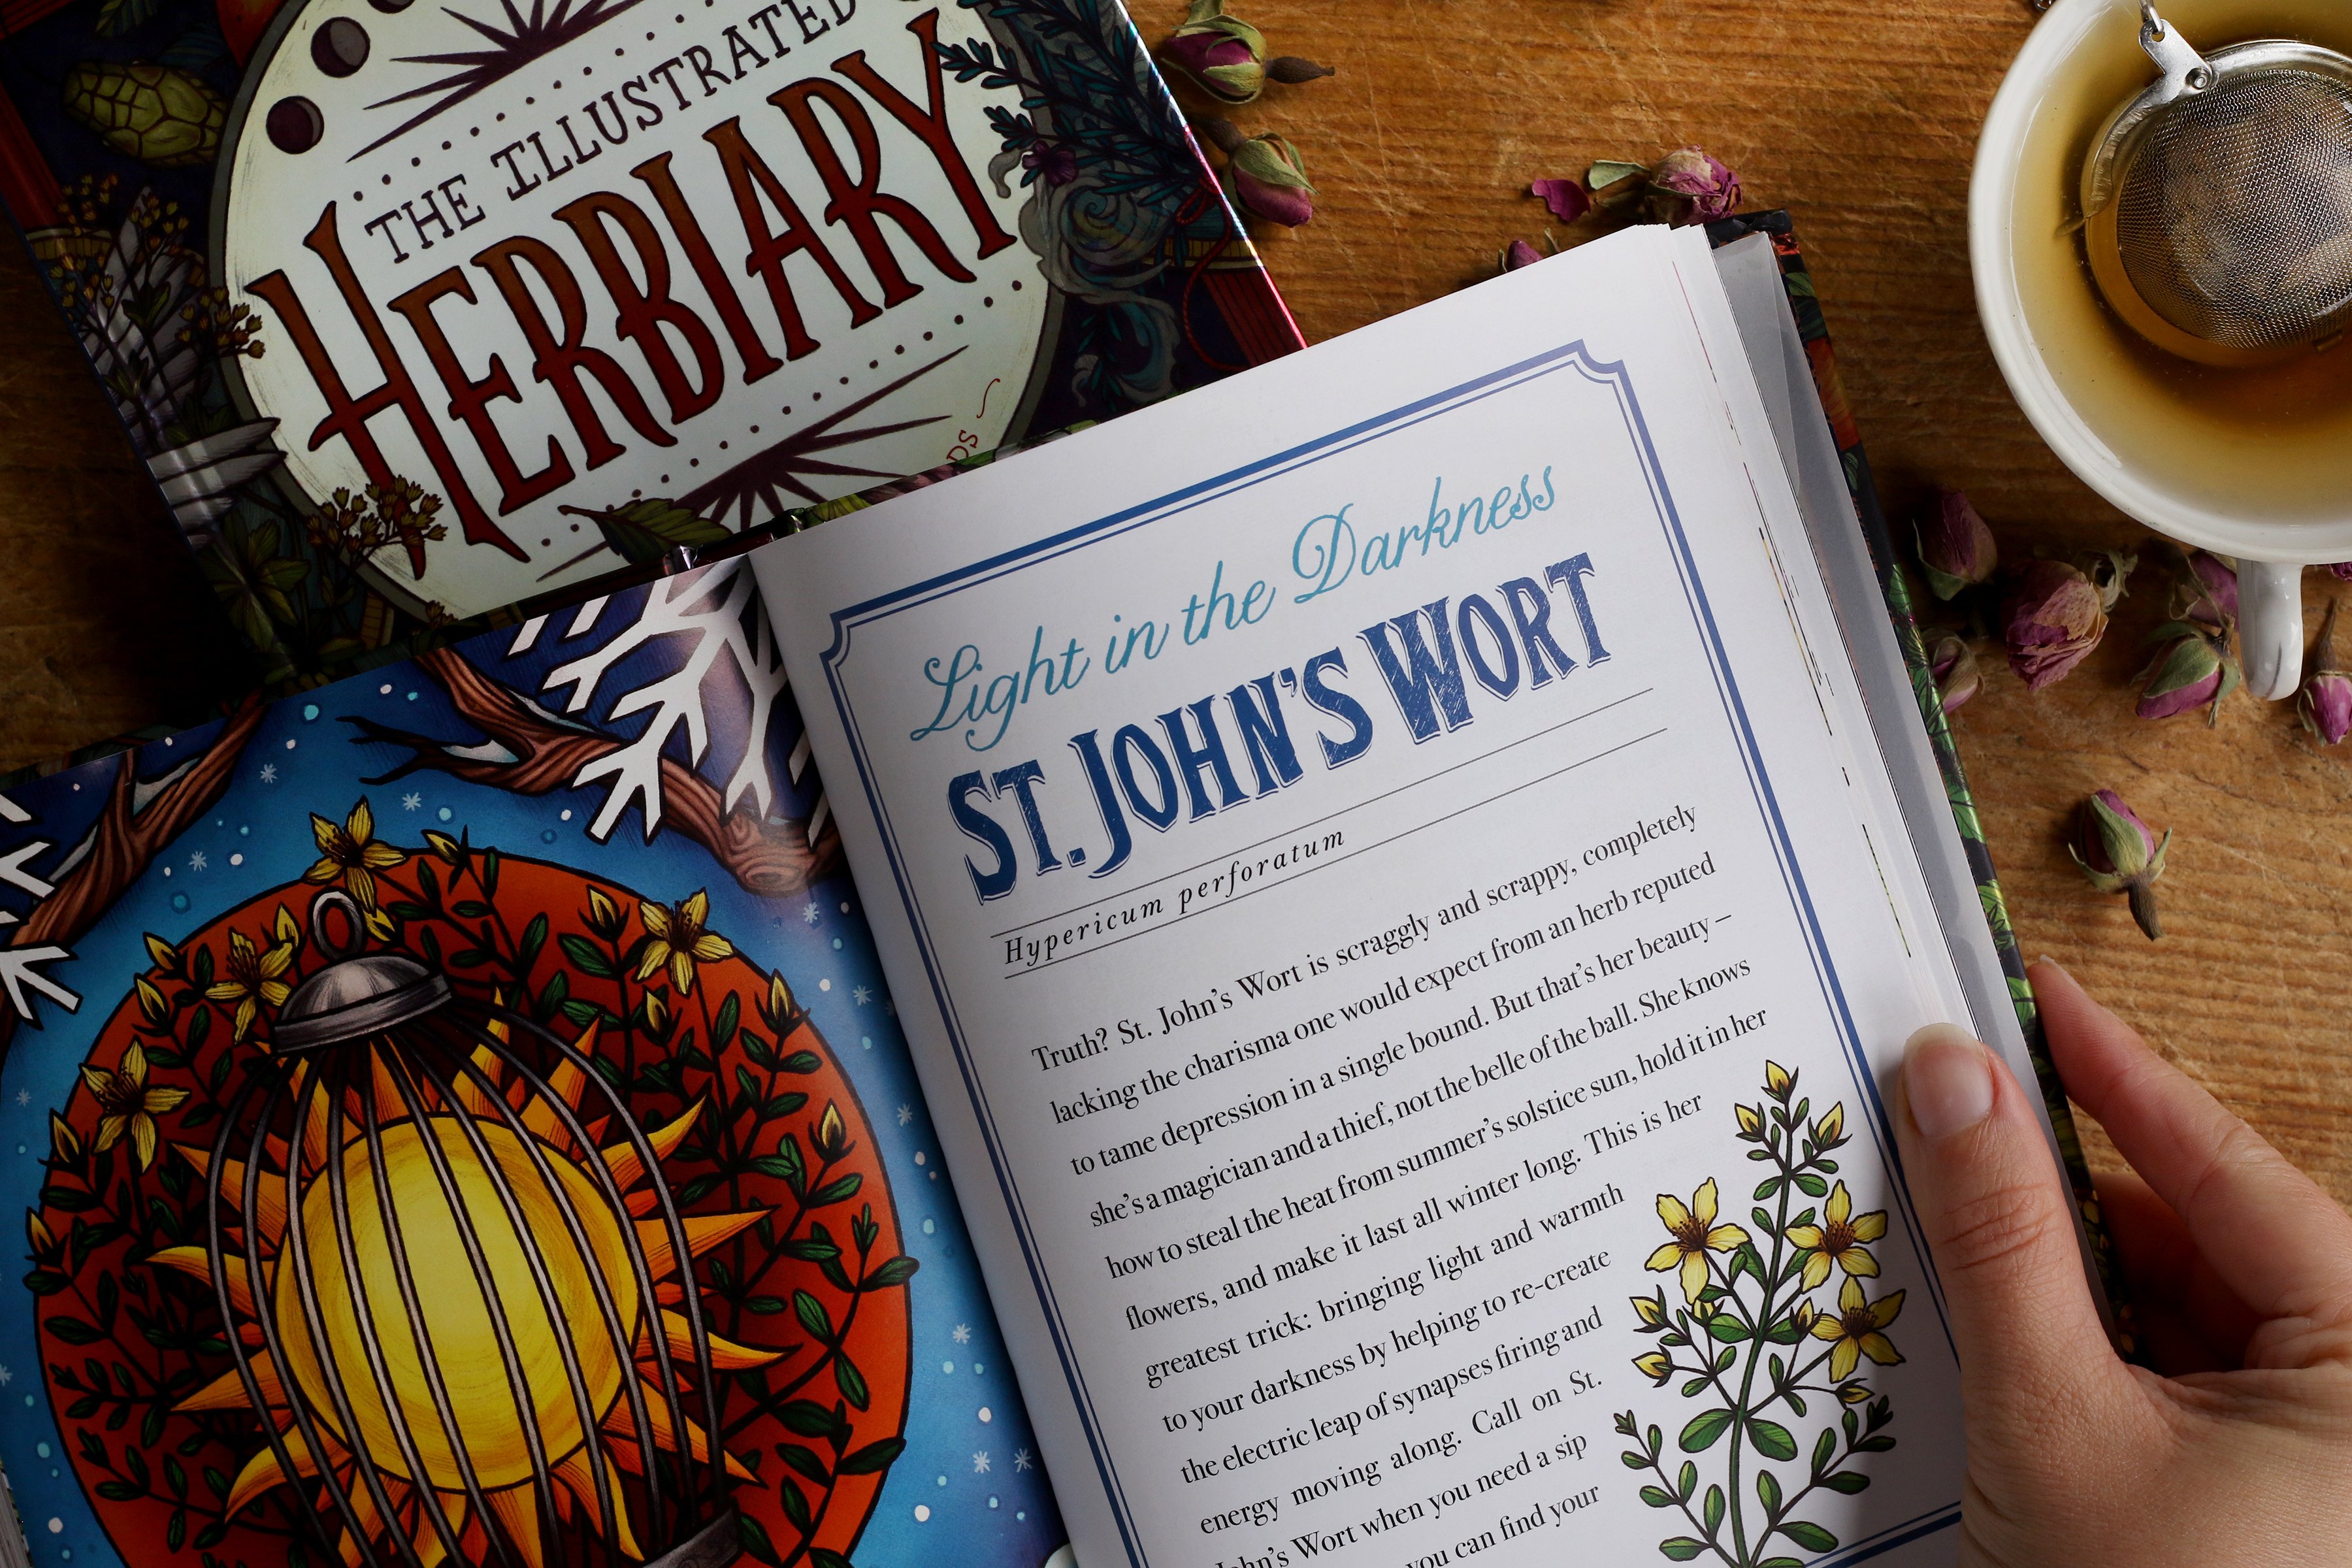 Excerpt from The Illustrated Herbiary by Maia Toll shows illustrations of St John's Wort with descriptions of traditional use. 